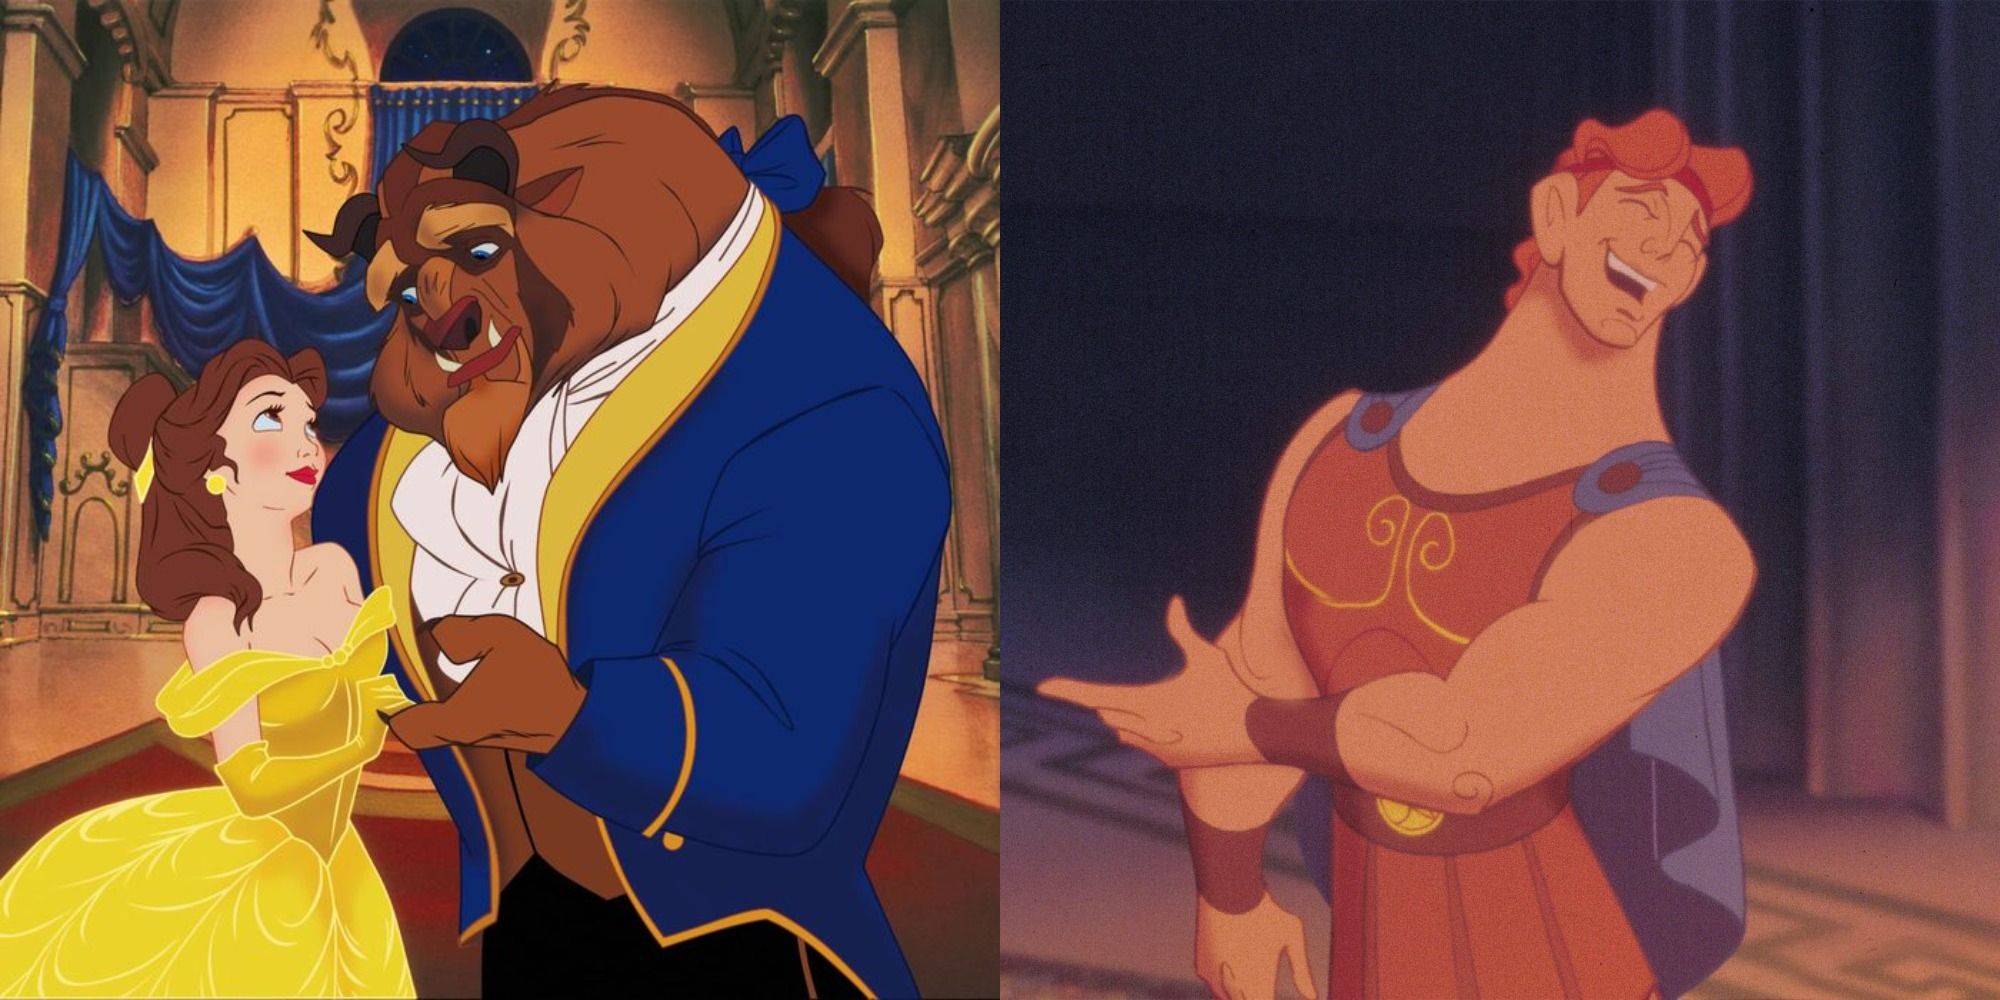 Two side by side images of Beauty and the Beast and Hercules from Disney animated films.